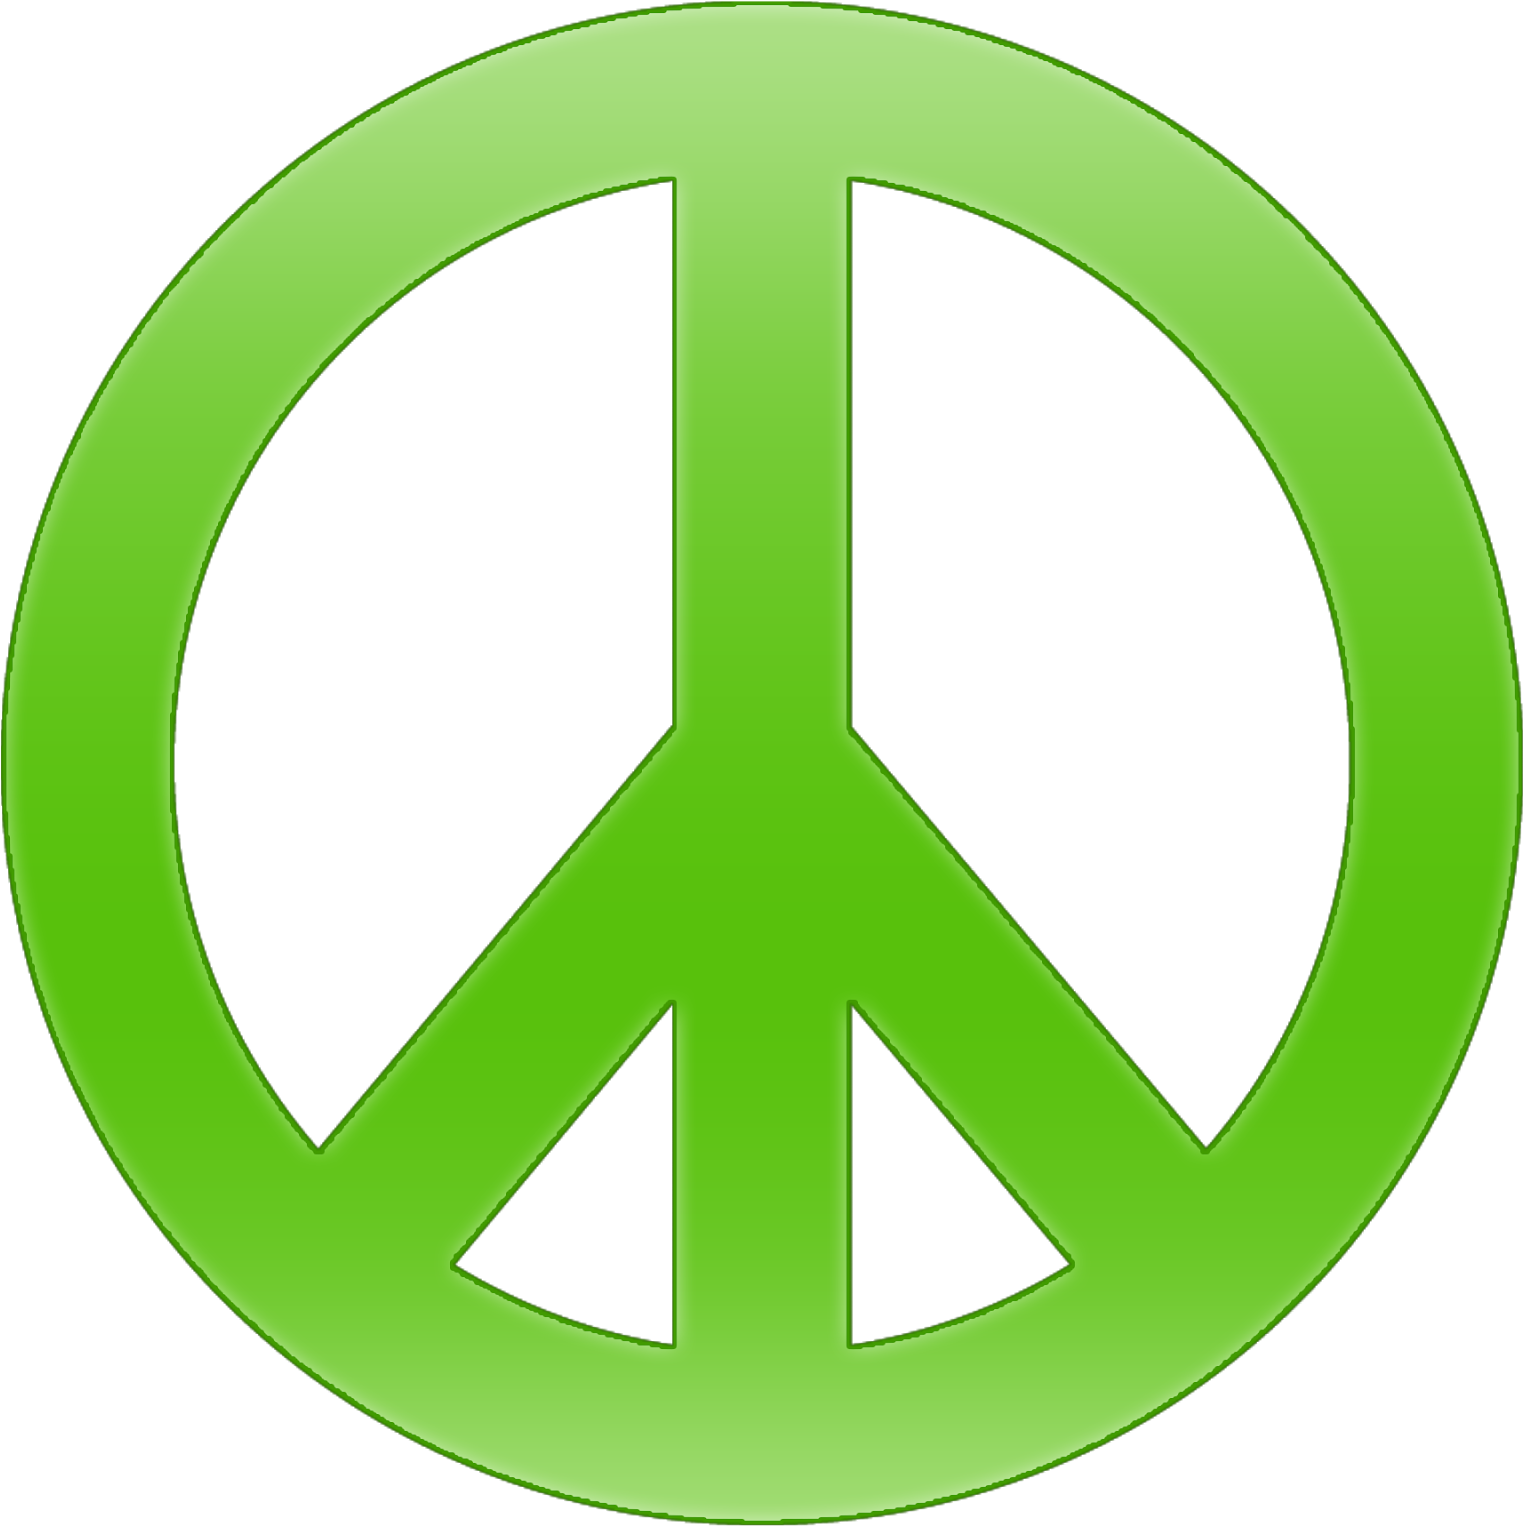 Endearing Peace Sign Images Free Clip Art Template - Craigslist Logo (1600x1600)